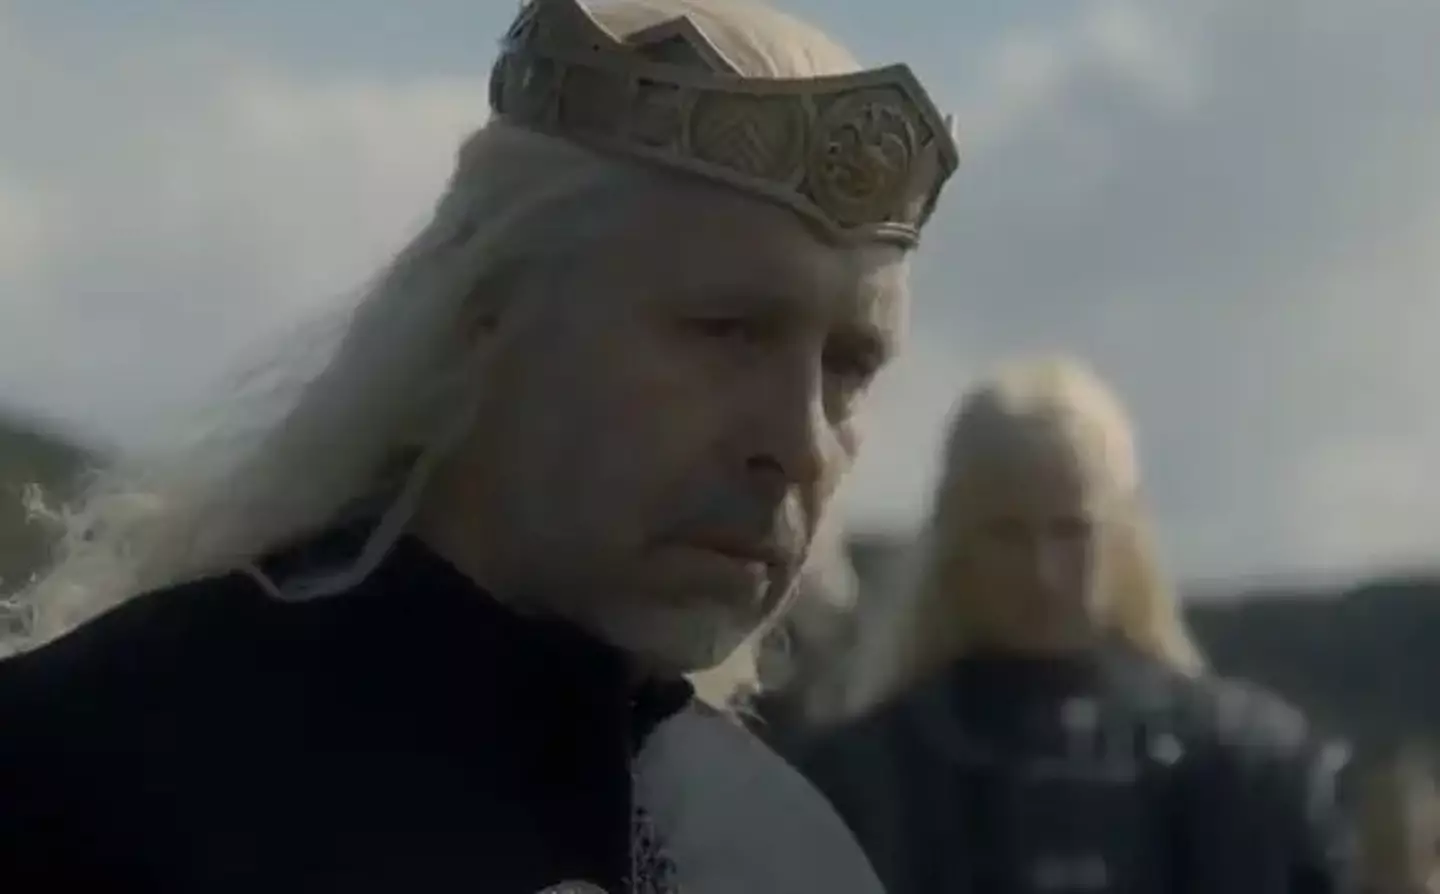 House of the Dragon viewers aren't too optimistic about Viserys' future.